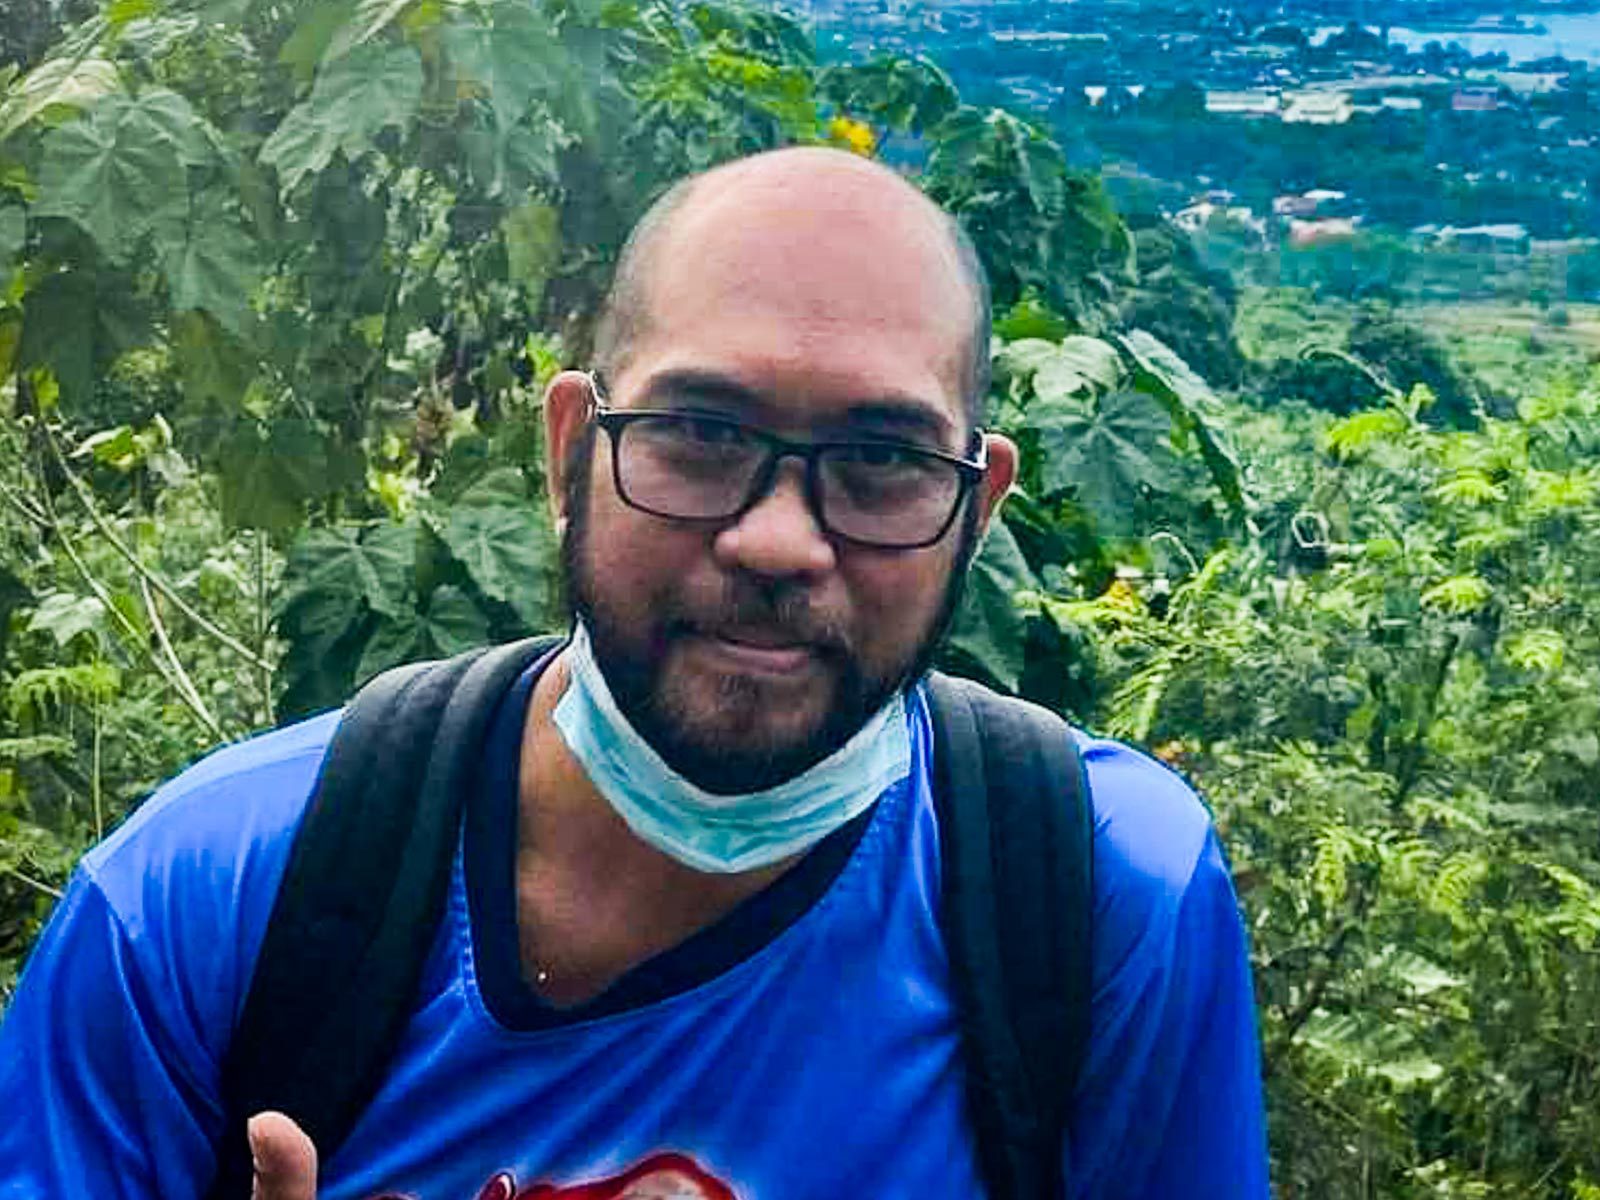 Cagayan de Oro’s most red-tagged journalist linked to Reds again